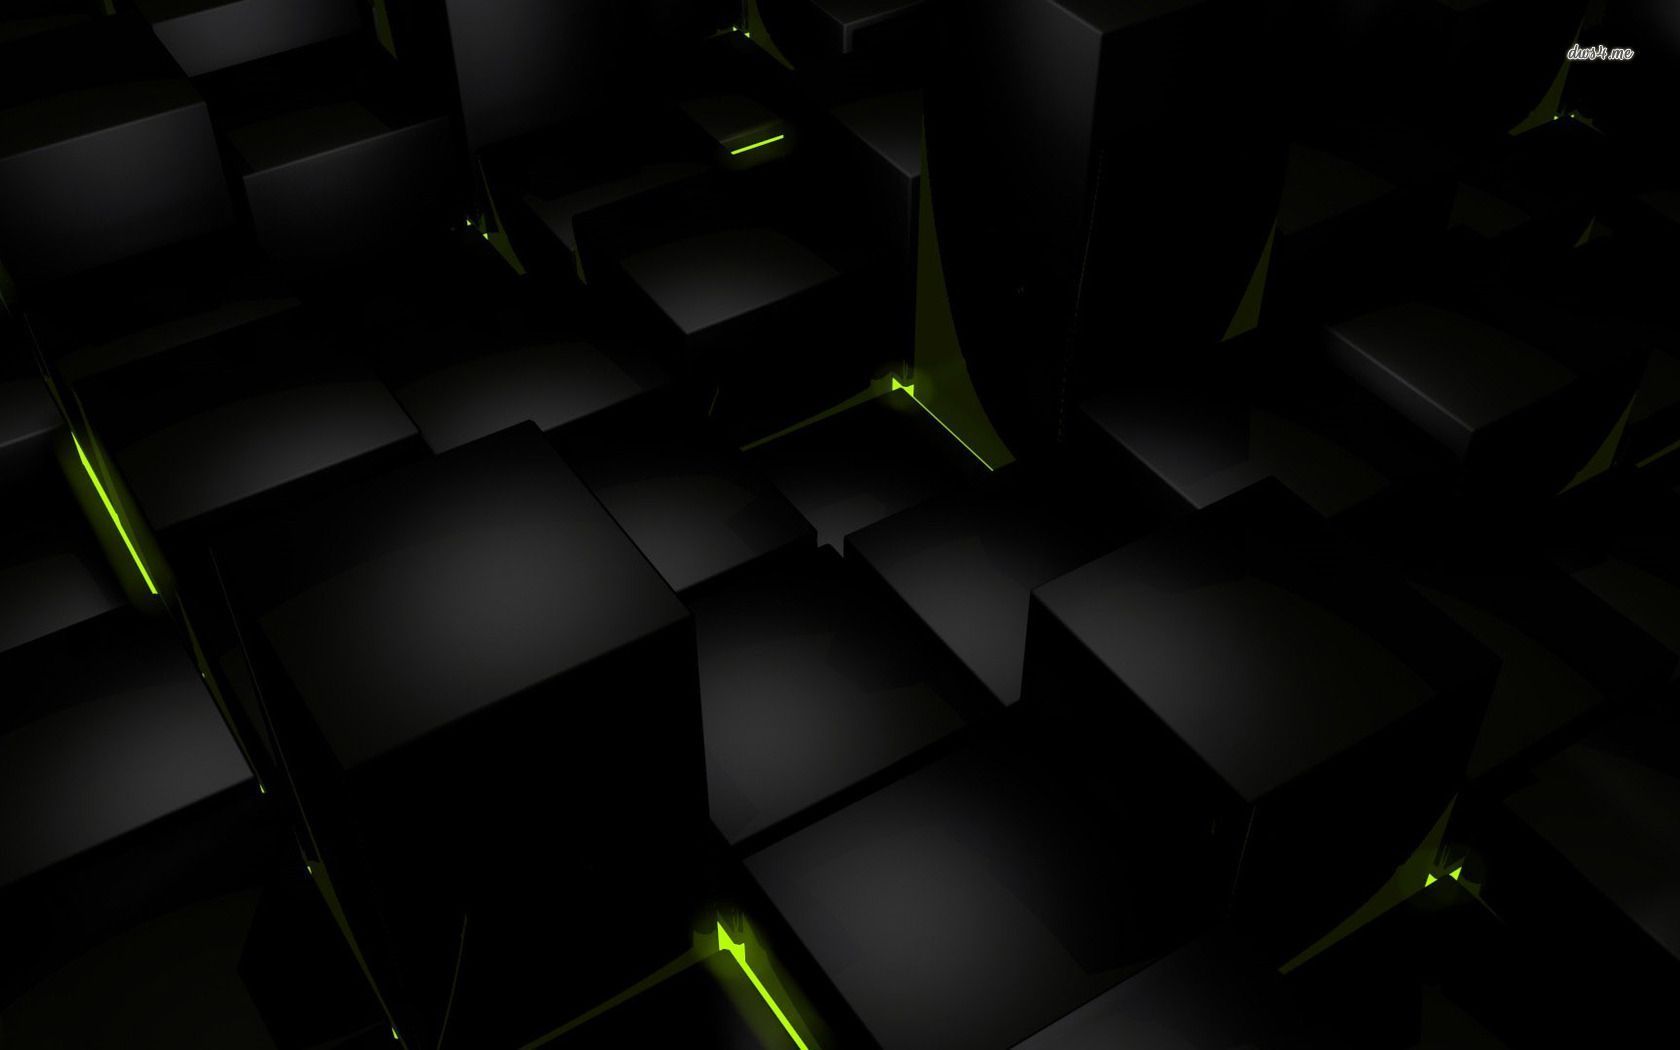 Black cubes with green lighting wallpaper - 3D wallpapers - #11242